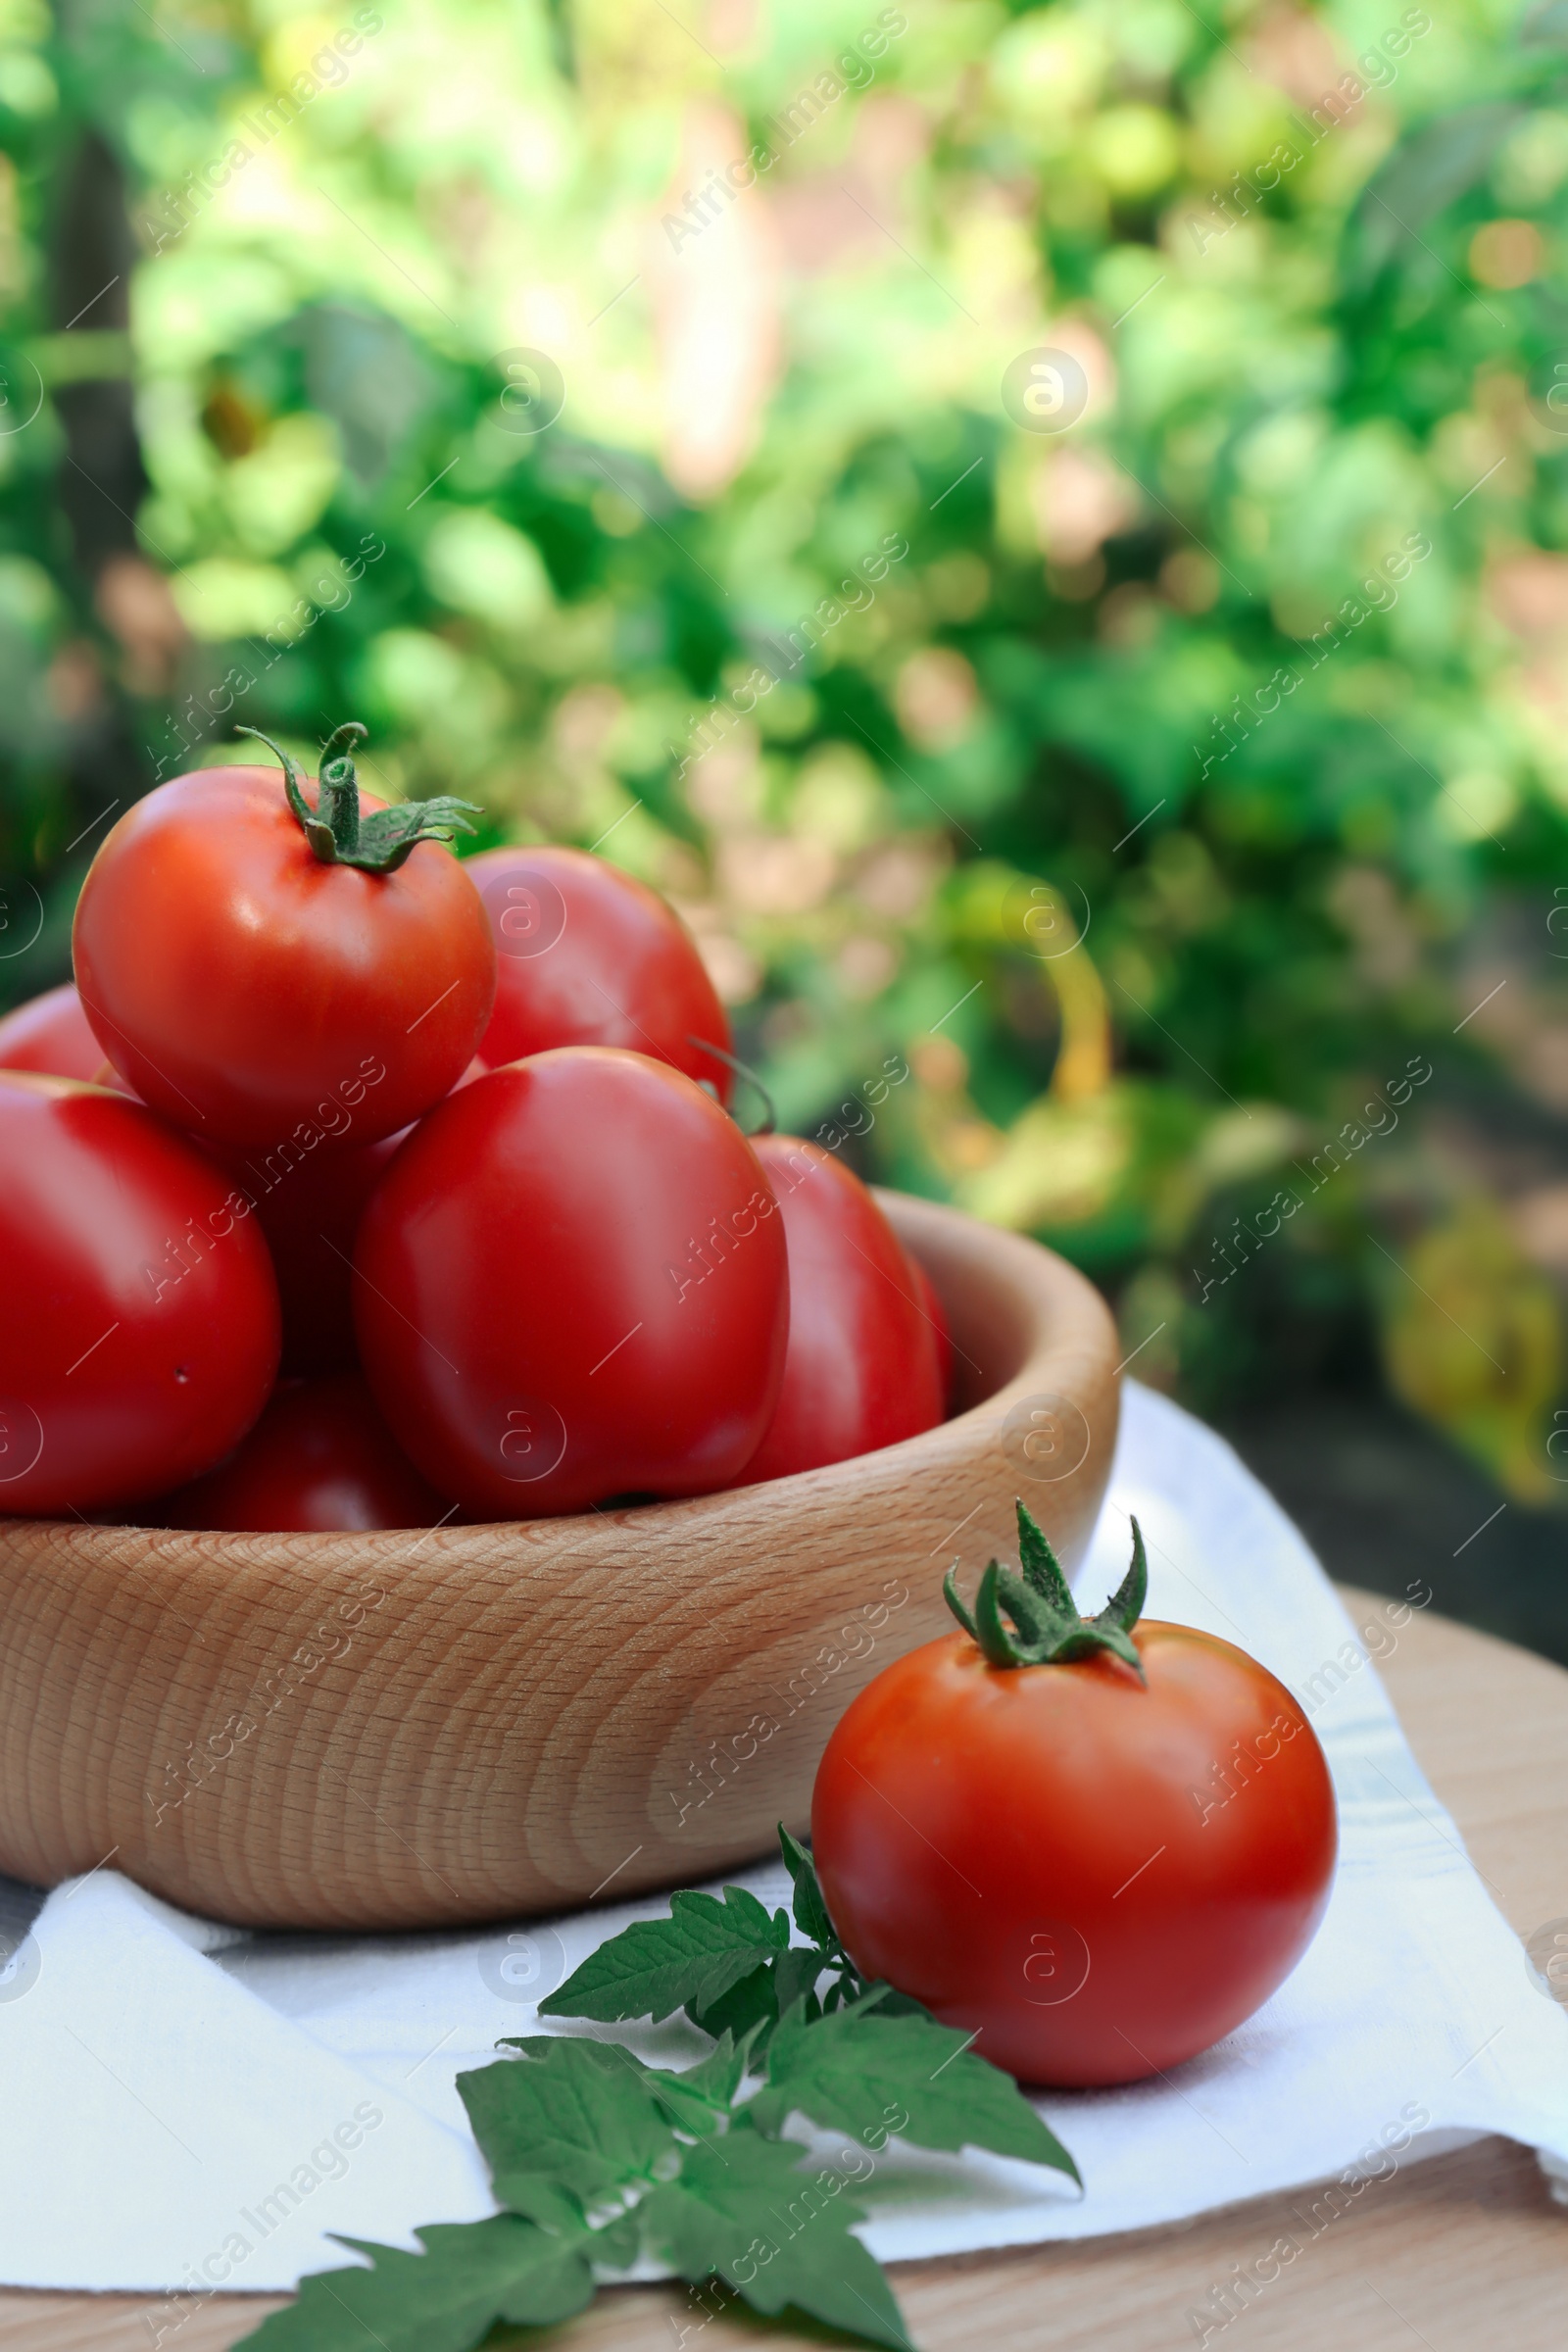 Photo of Bowl and fresh tomatoes on wooden table outdoors